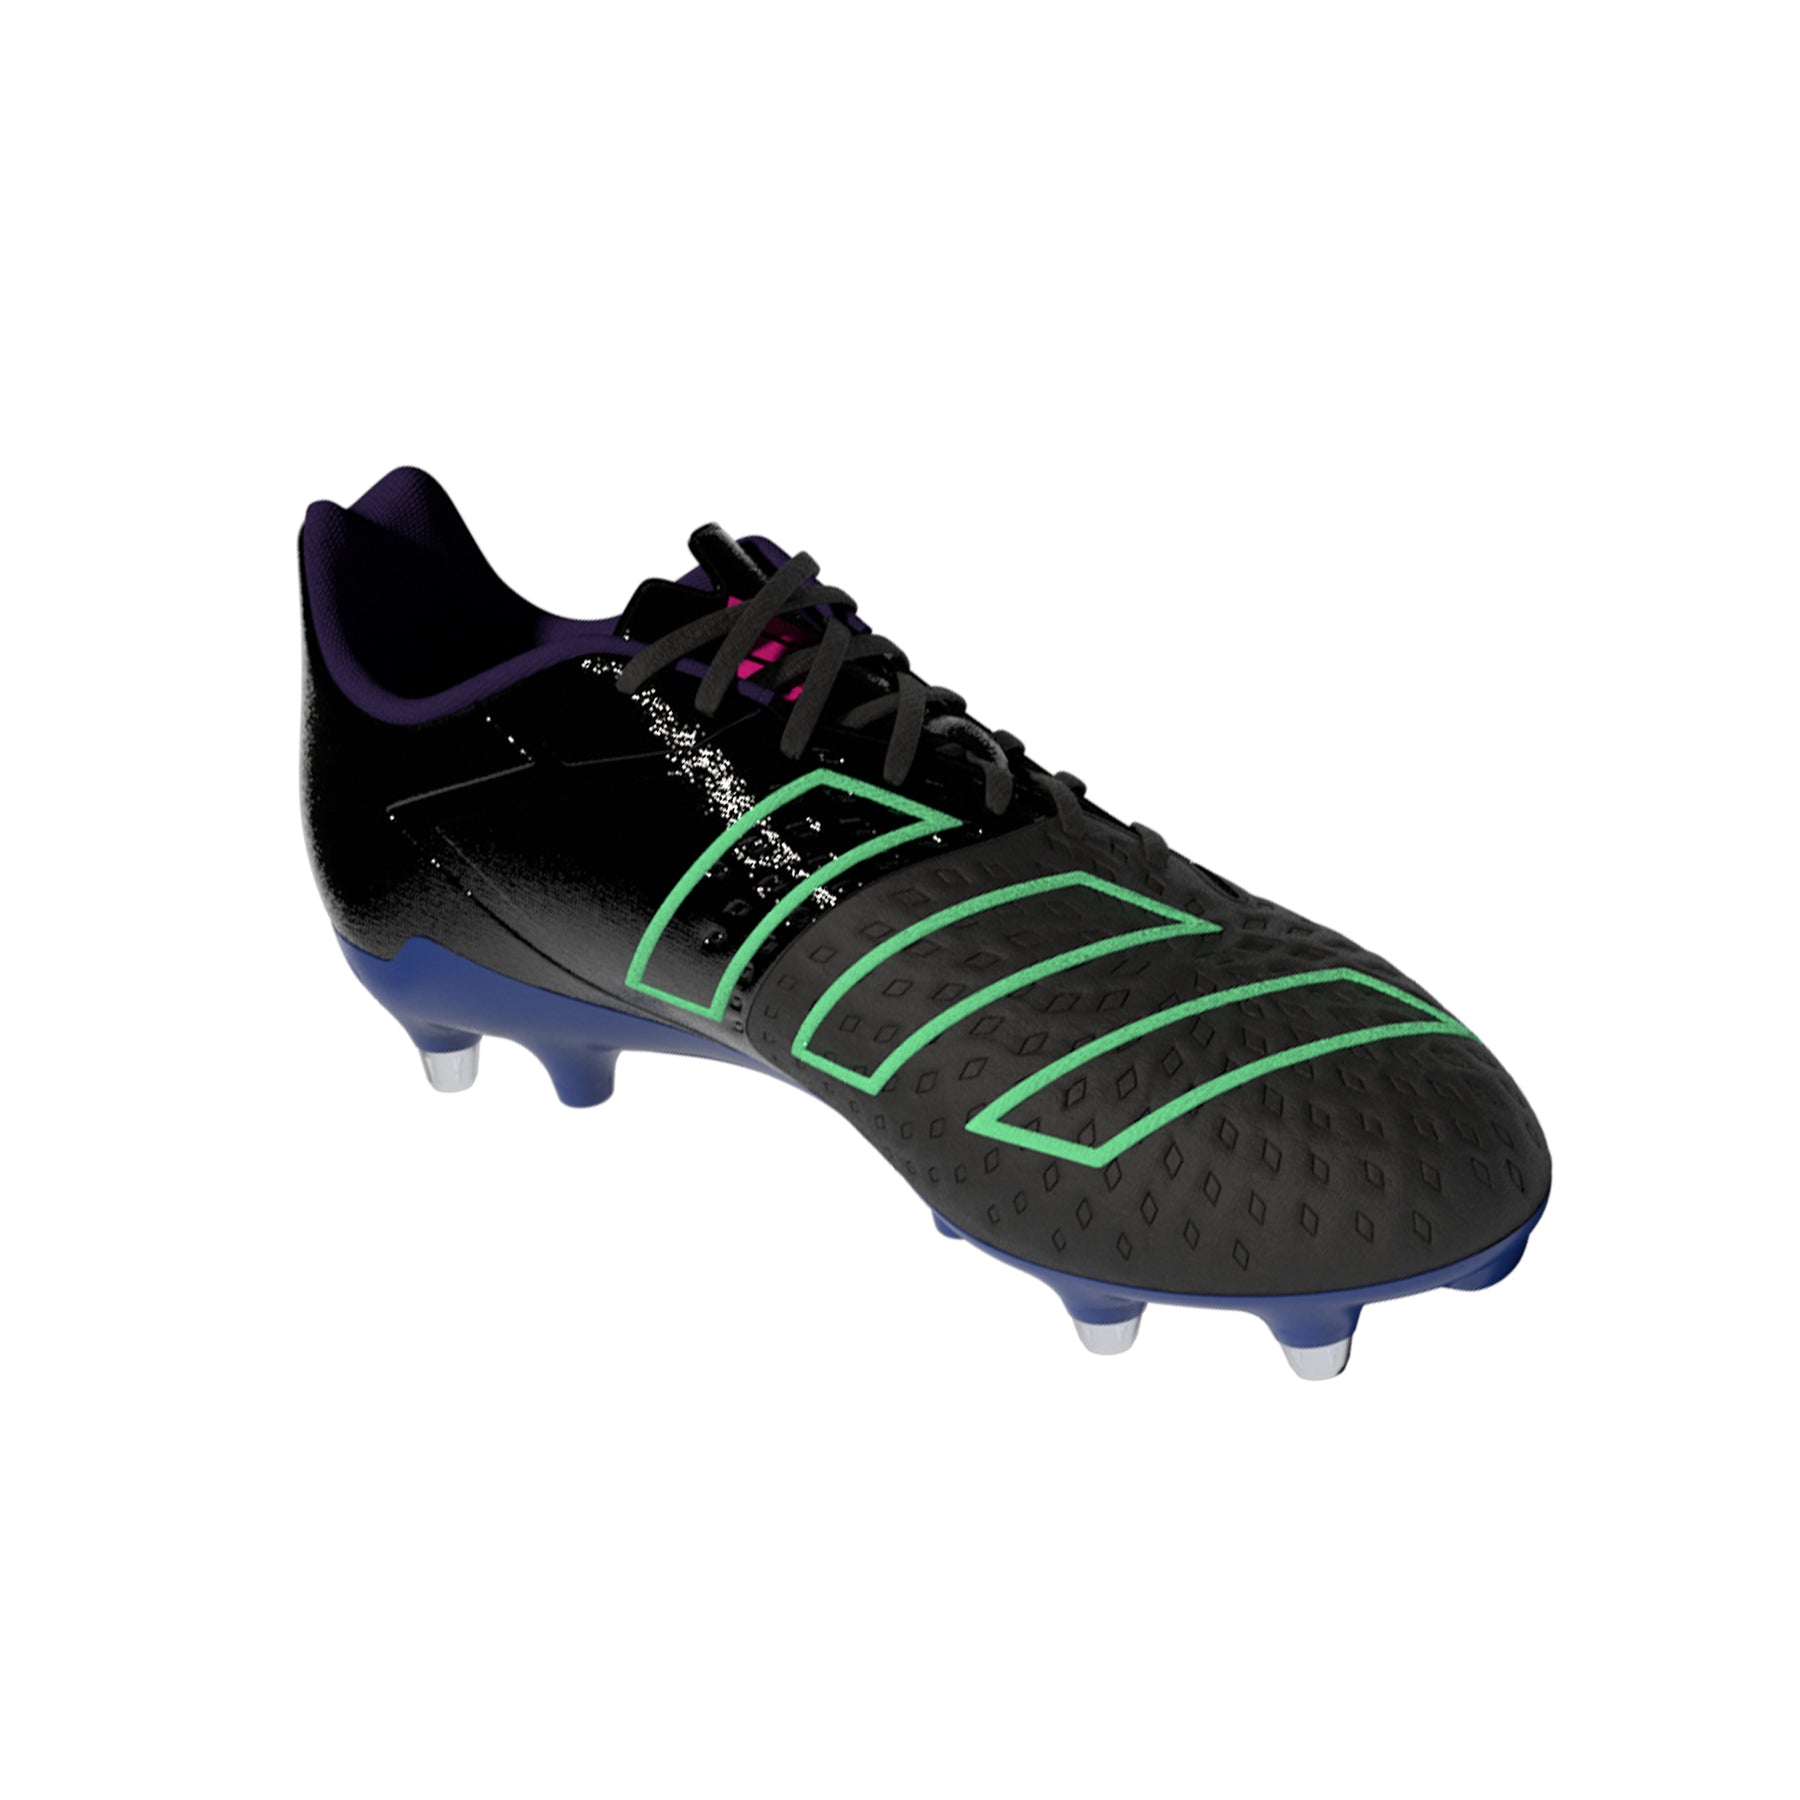 Adidas Malice Elite SG Rugby Boots 2022: Black